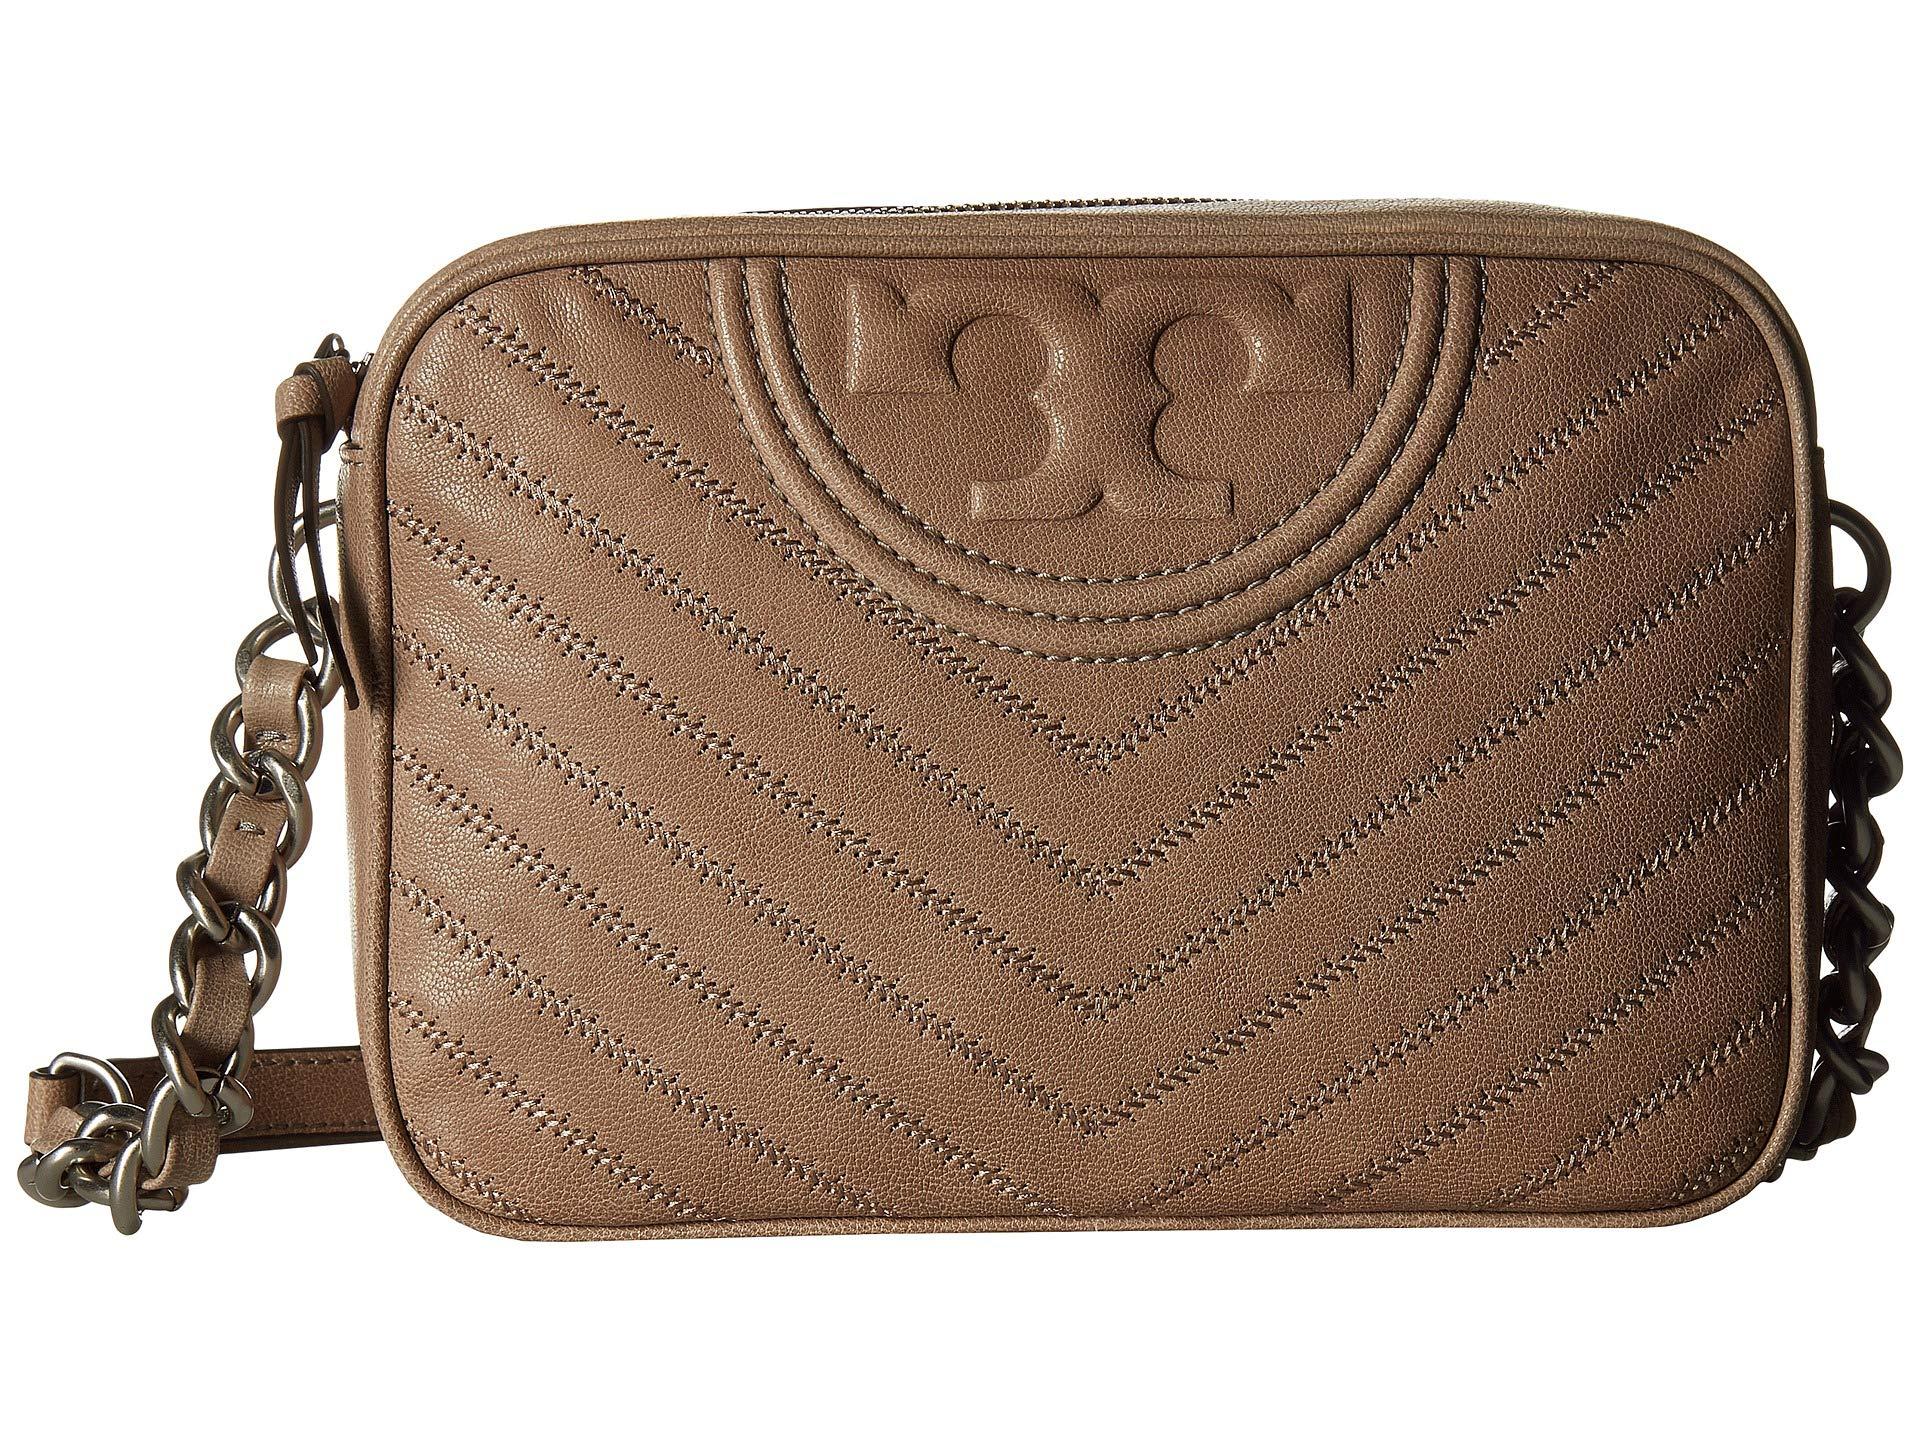 Tory Burch Leather Fleming Distressed Camera Bag in Taupe (Brown) - Lyst